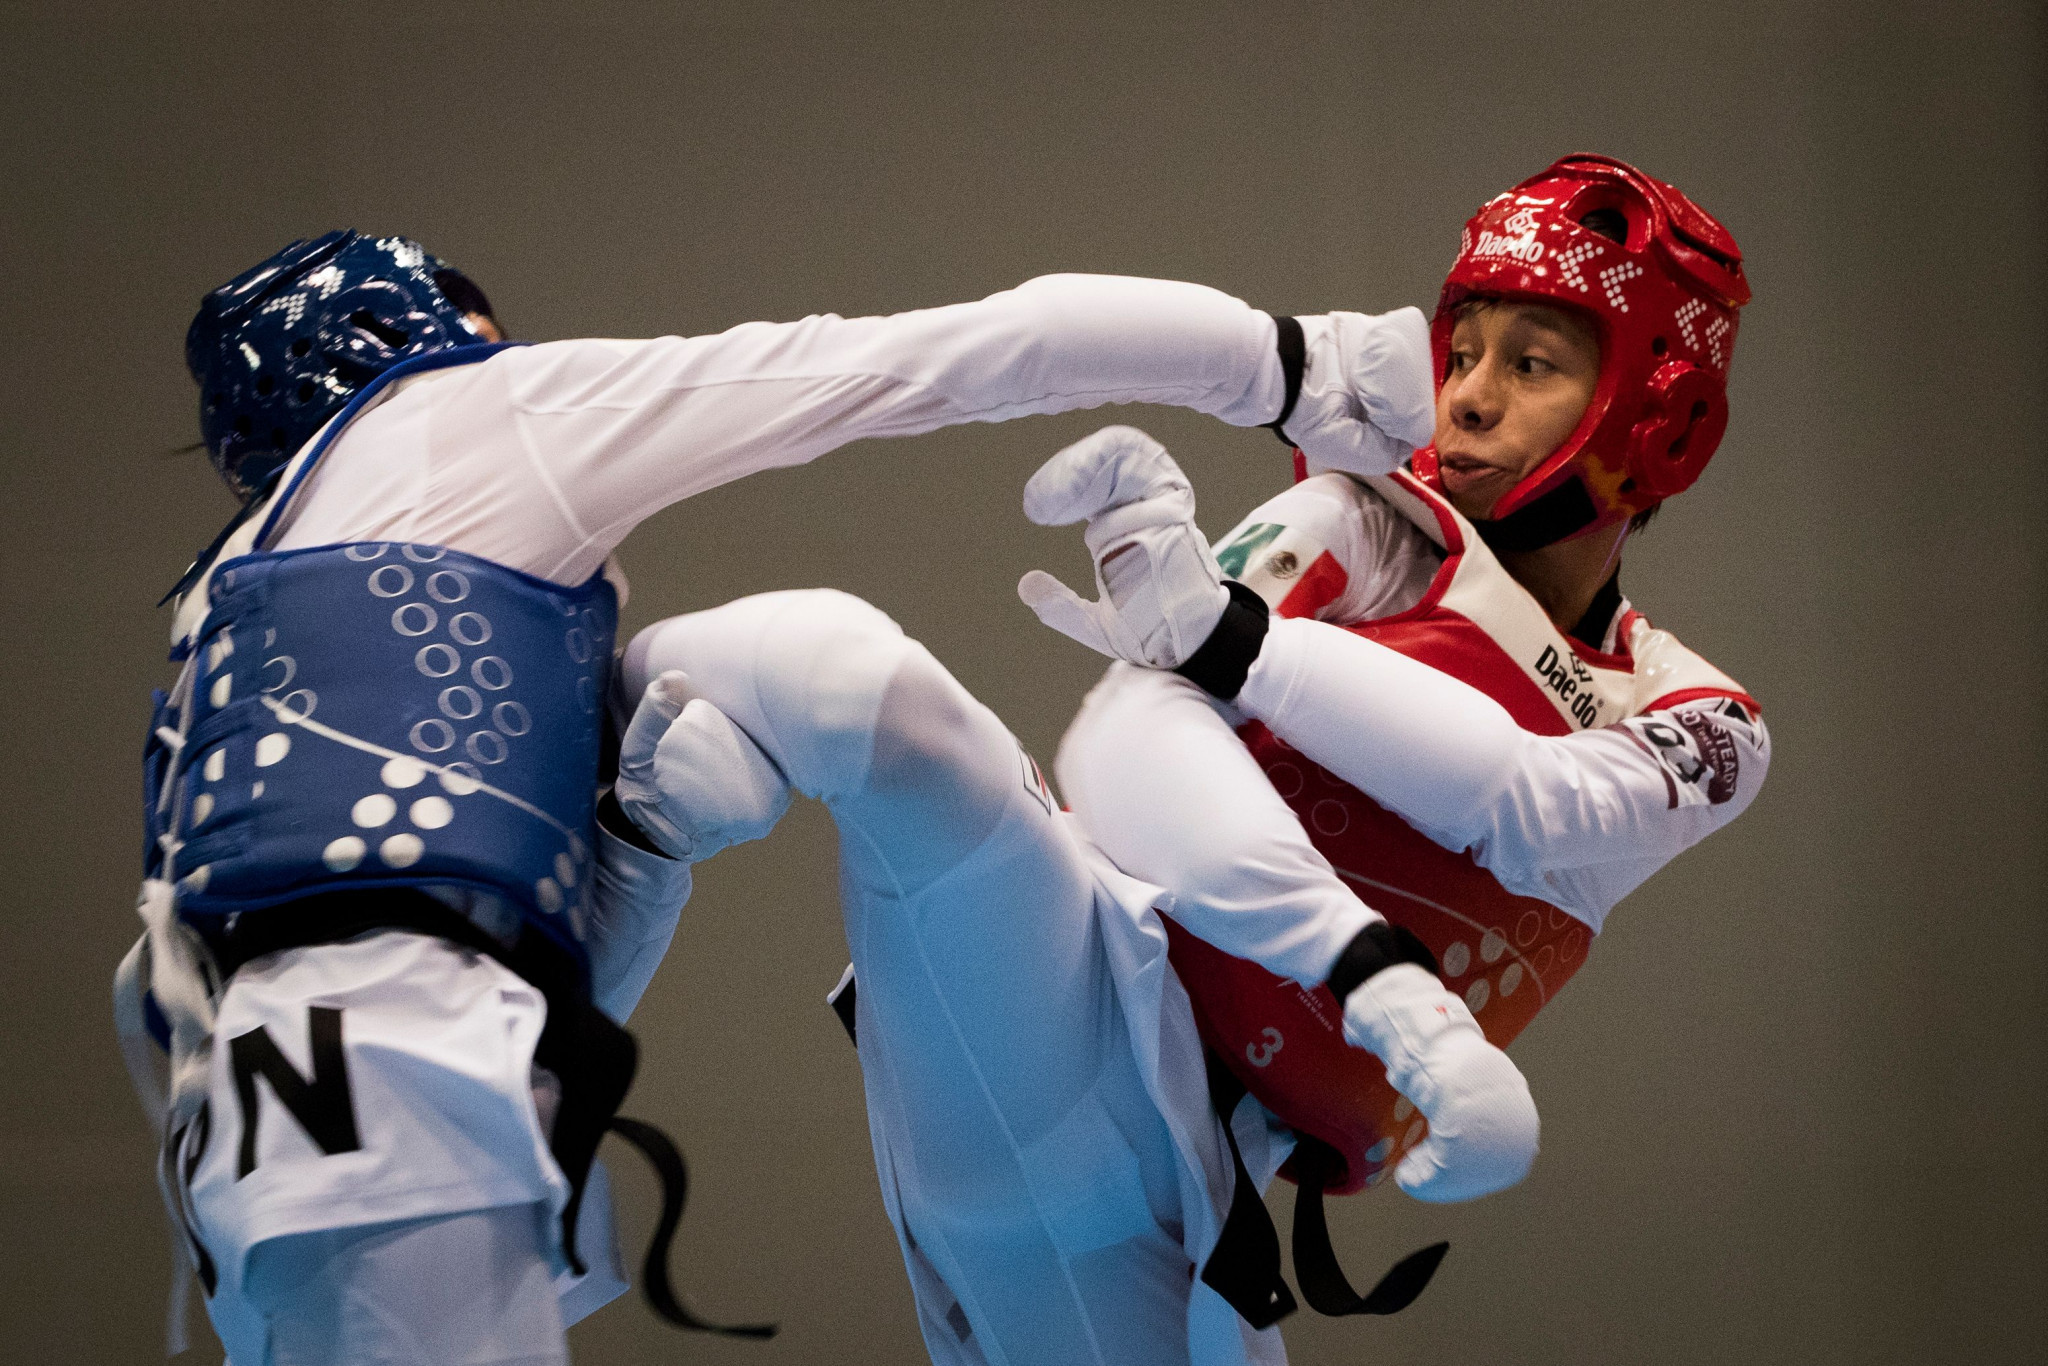 On the subject of athlete welfare, the World Taekwondo Council approved tighter safety protocols for major international events ©Getty Images